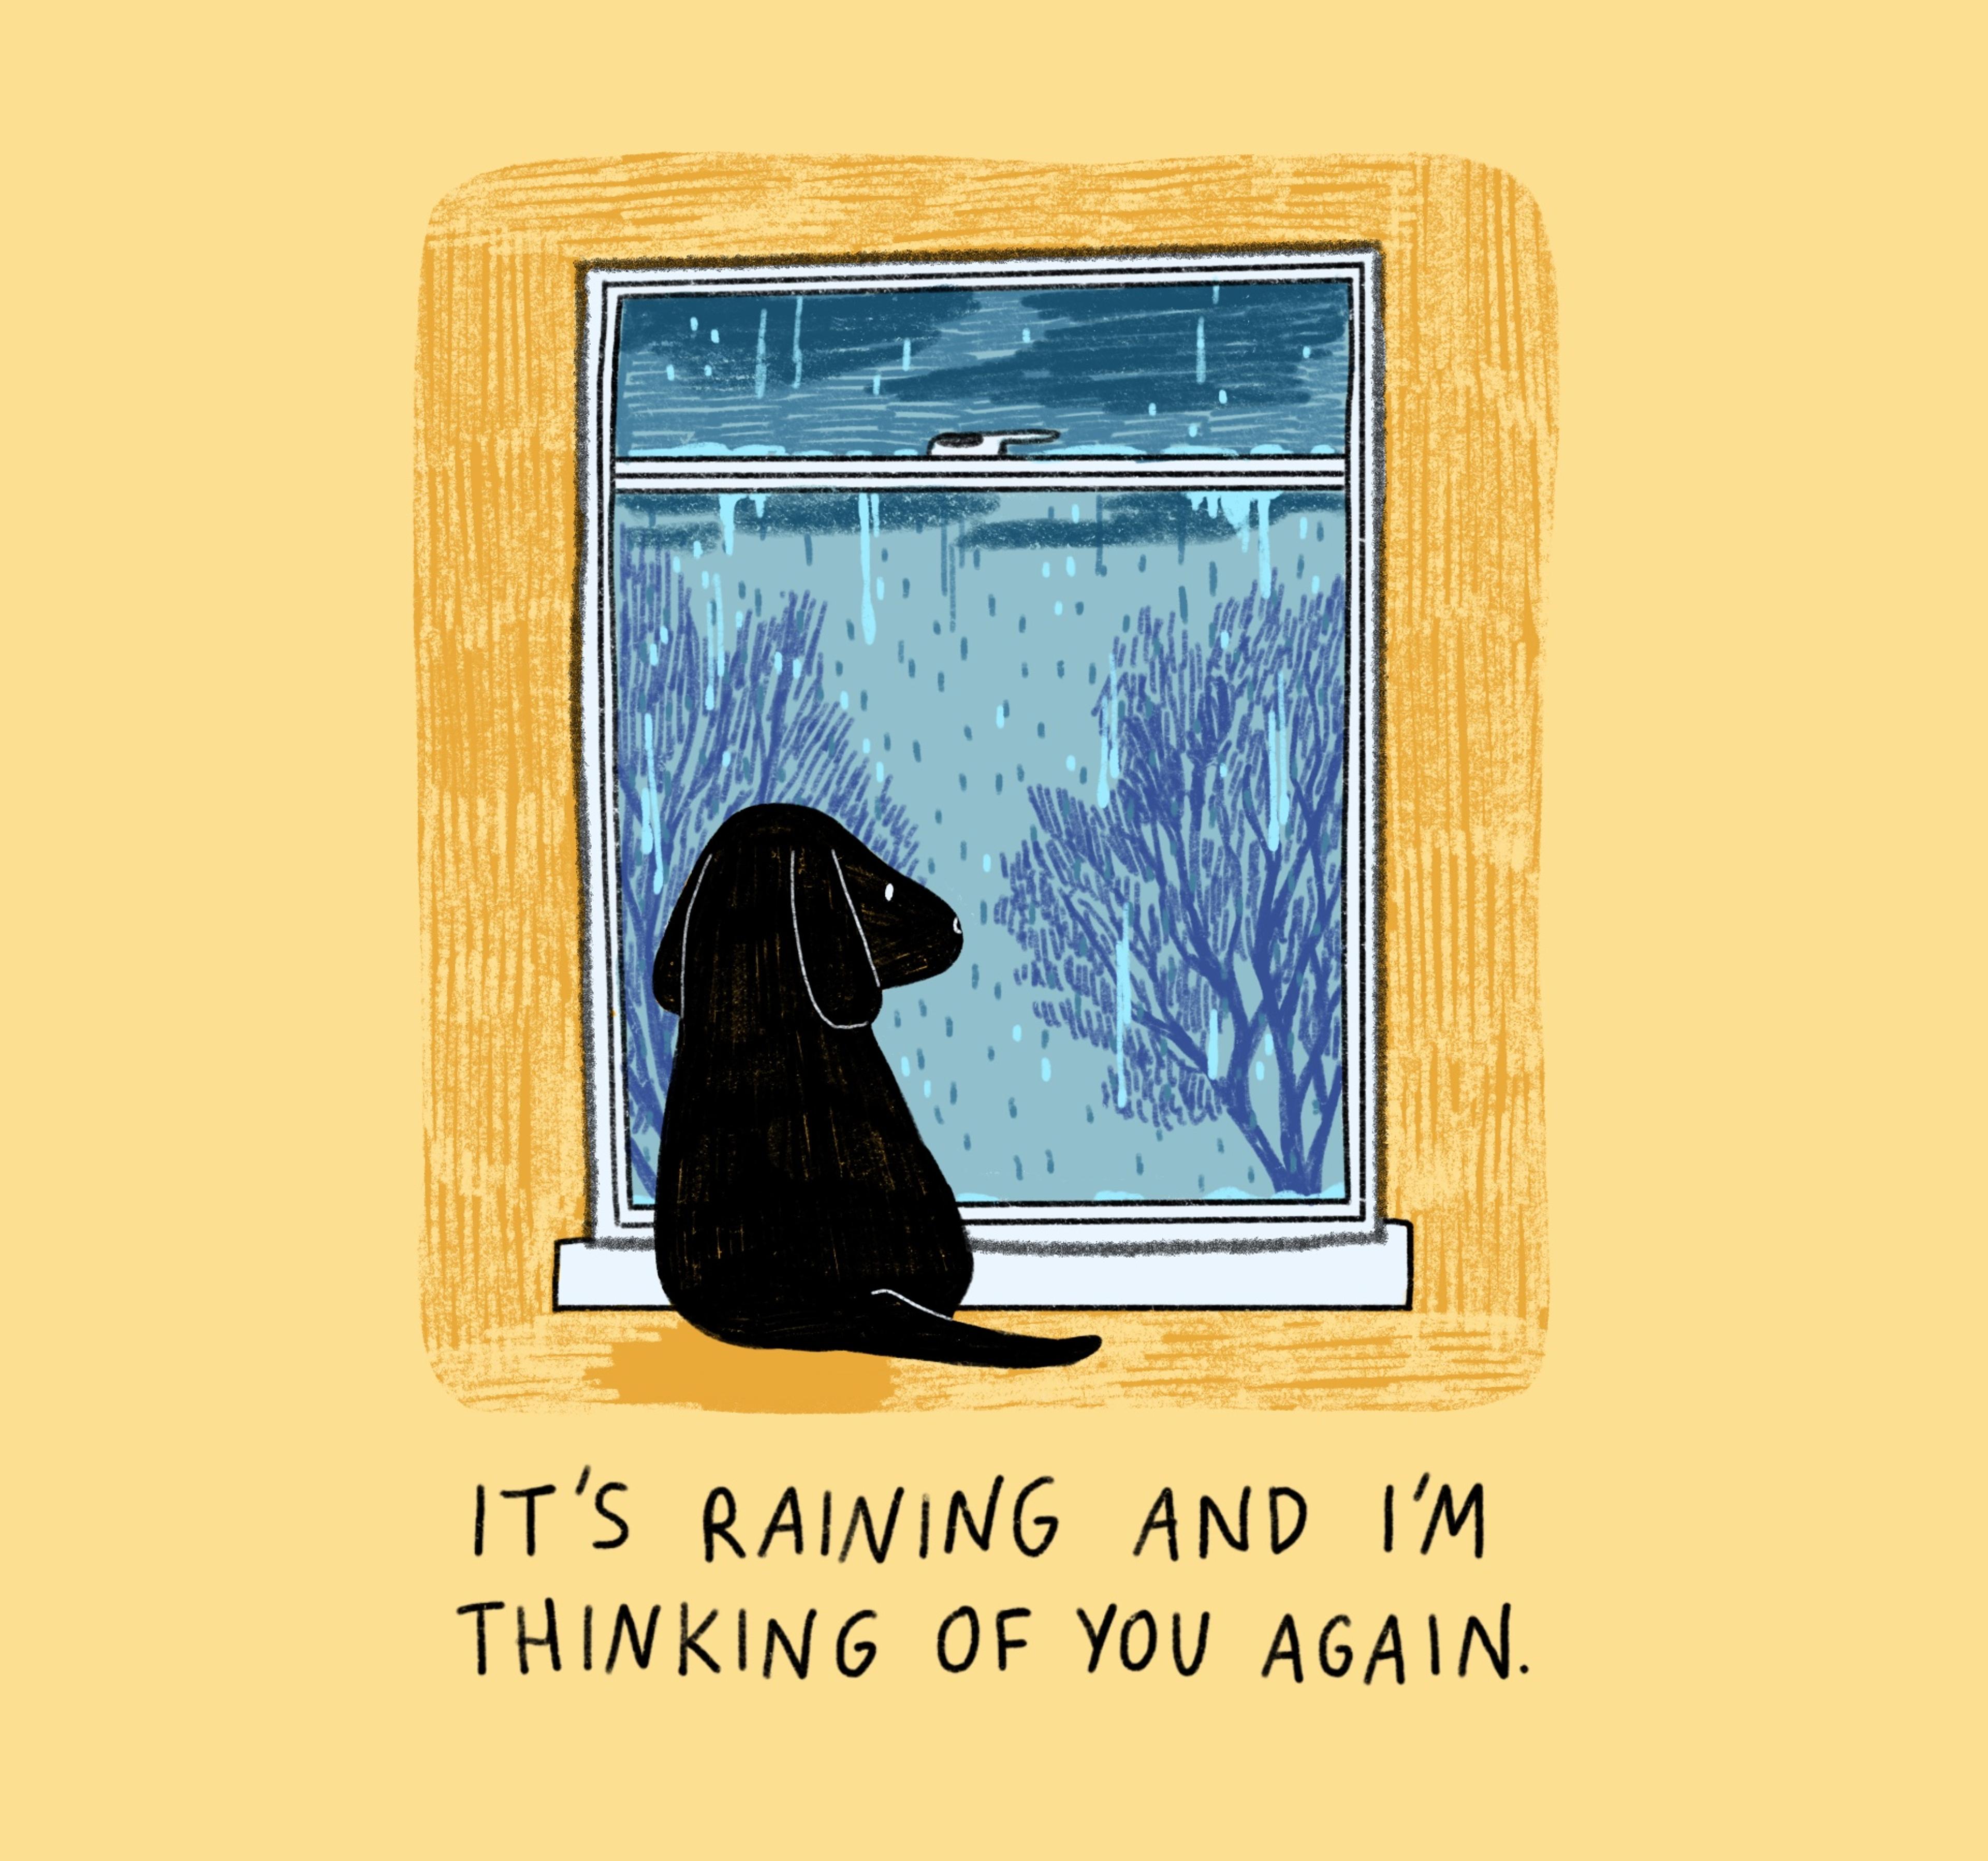 Illustration of a dog looking out of a window, with words that read: "It's raining and I'm thinking of you again."